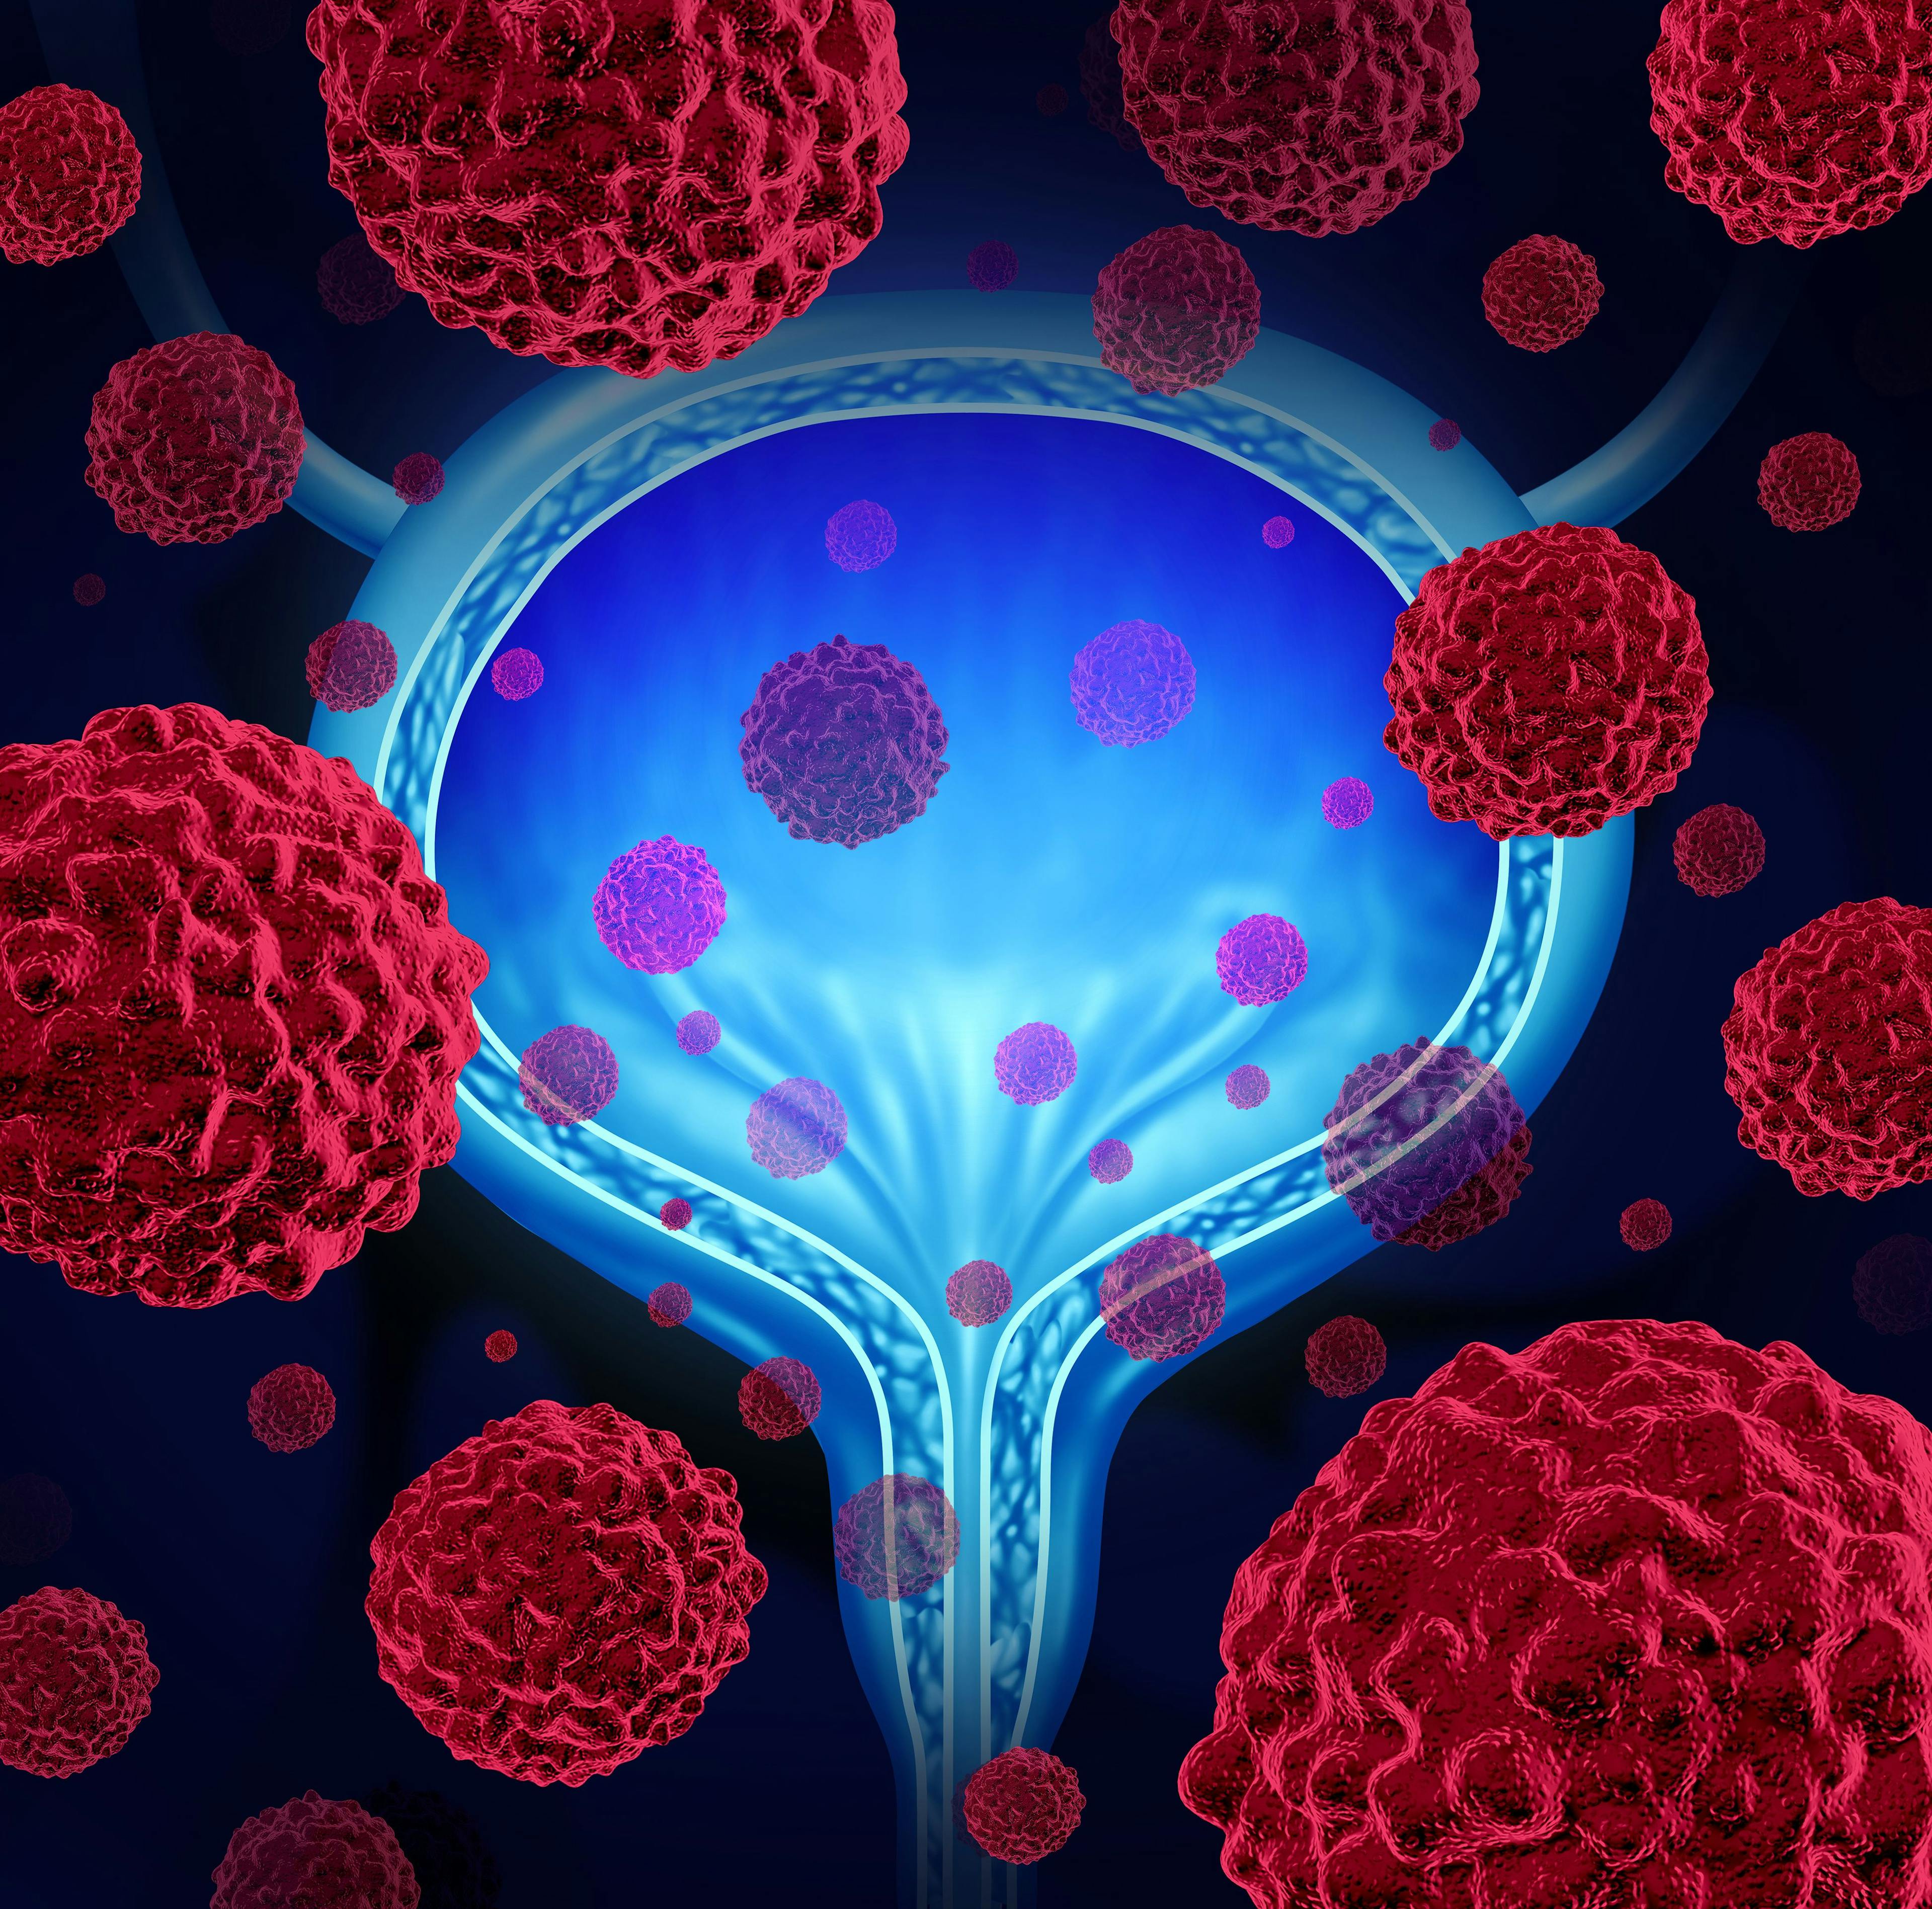 FDA Sets New Review Date for Bladder Cancer Immunotherapy